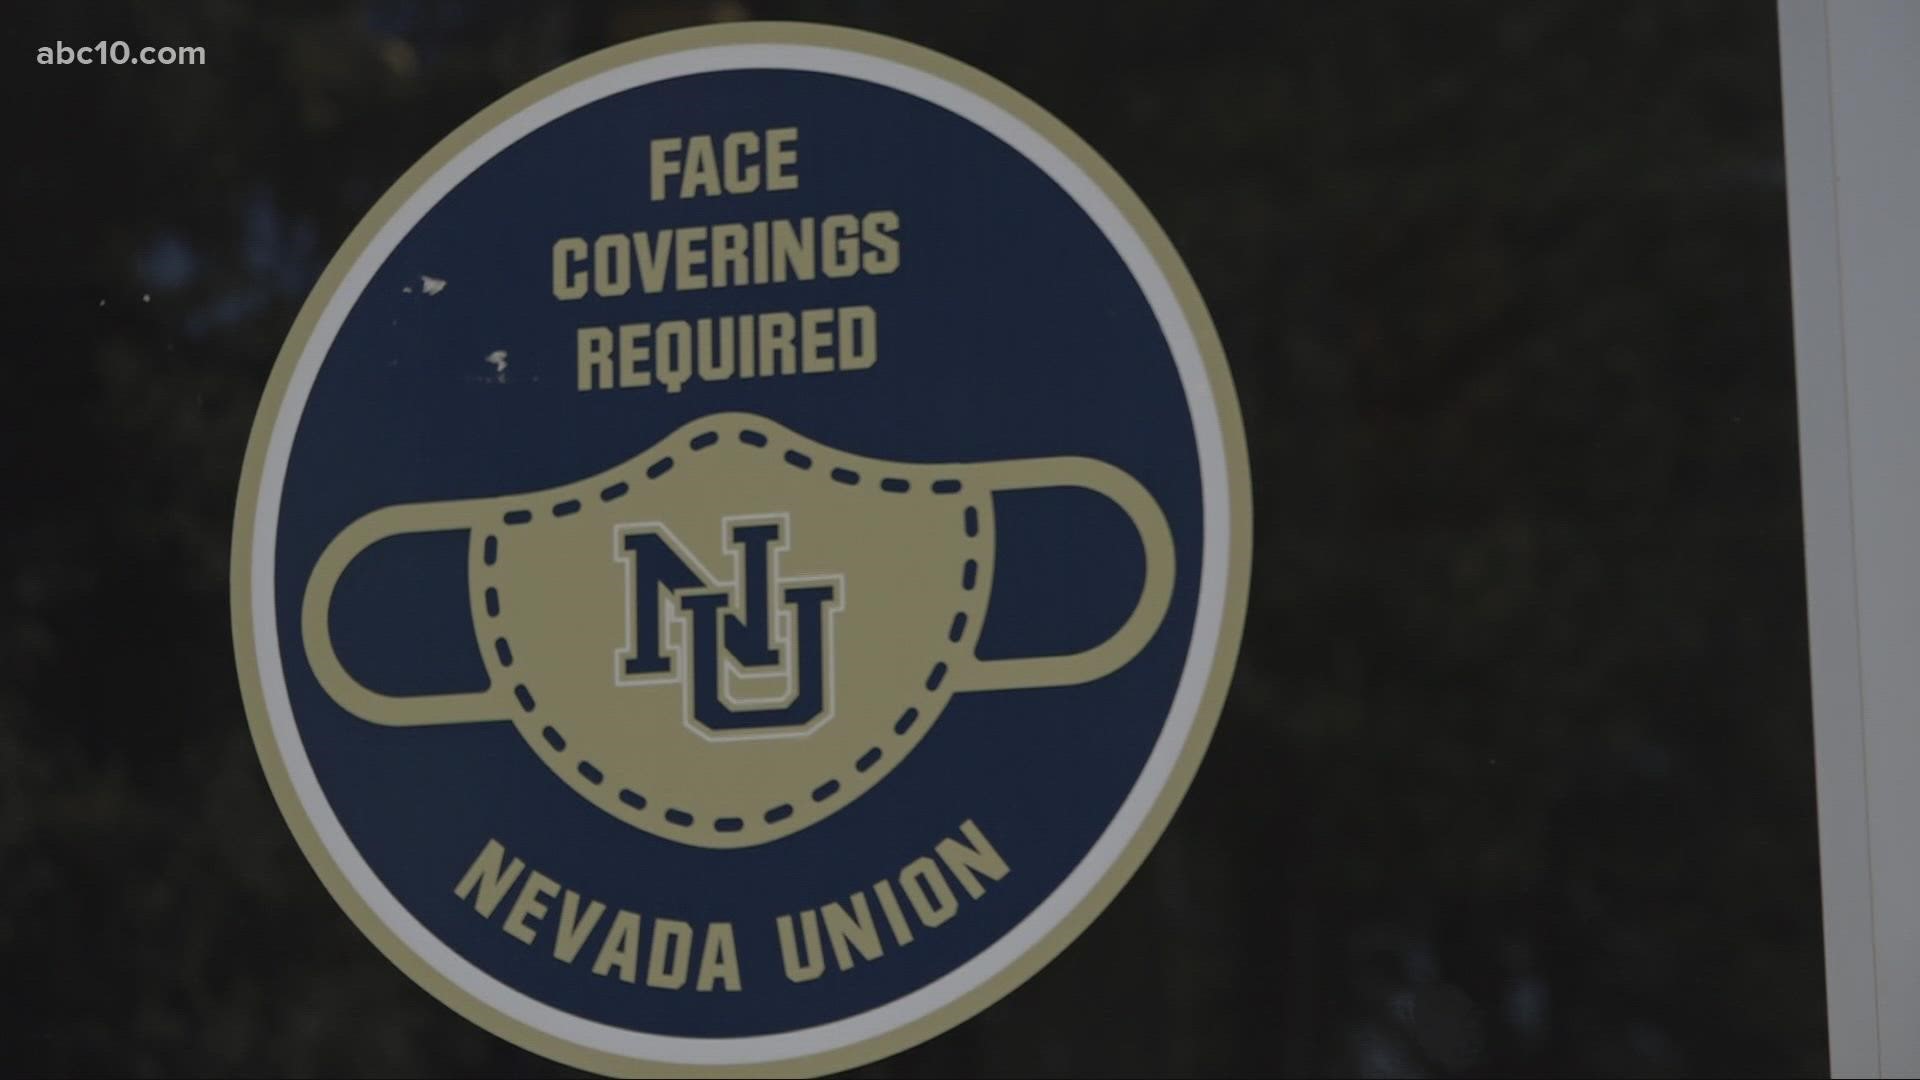 Nevada Union High School canceled classes due to a teacher "sick out."